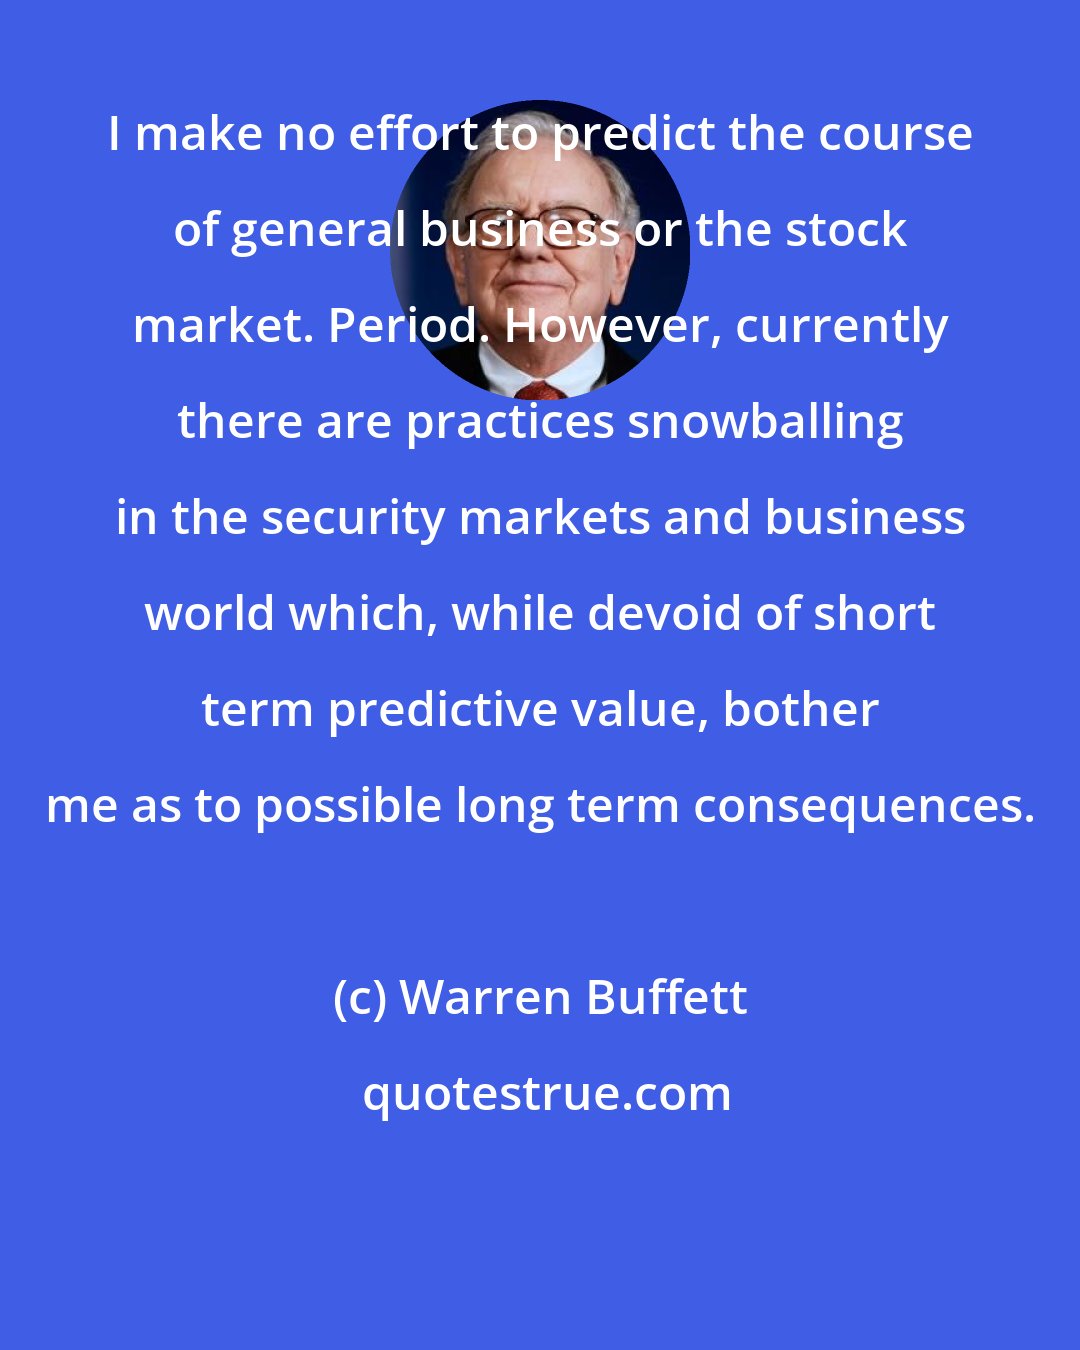 Warren Buffett: I make no effort to predict the course of general business or the stock market. Period. However, currently there are practices snowballing in the security markets and business world which, while devoid of short term predictive value, bother me as to possible long term consequences.